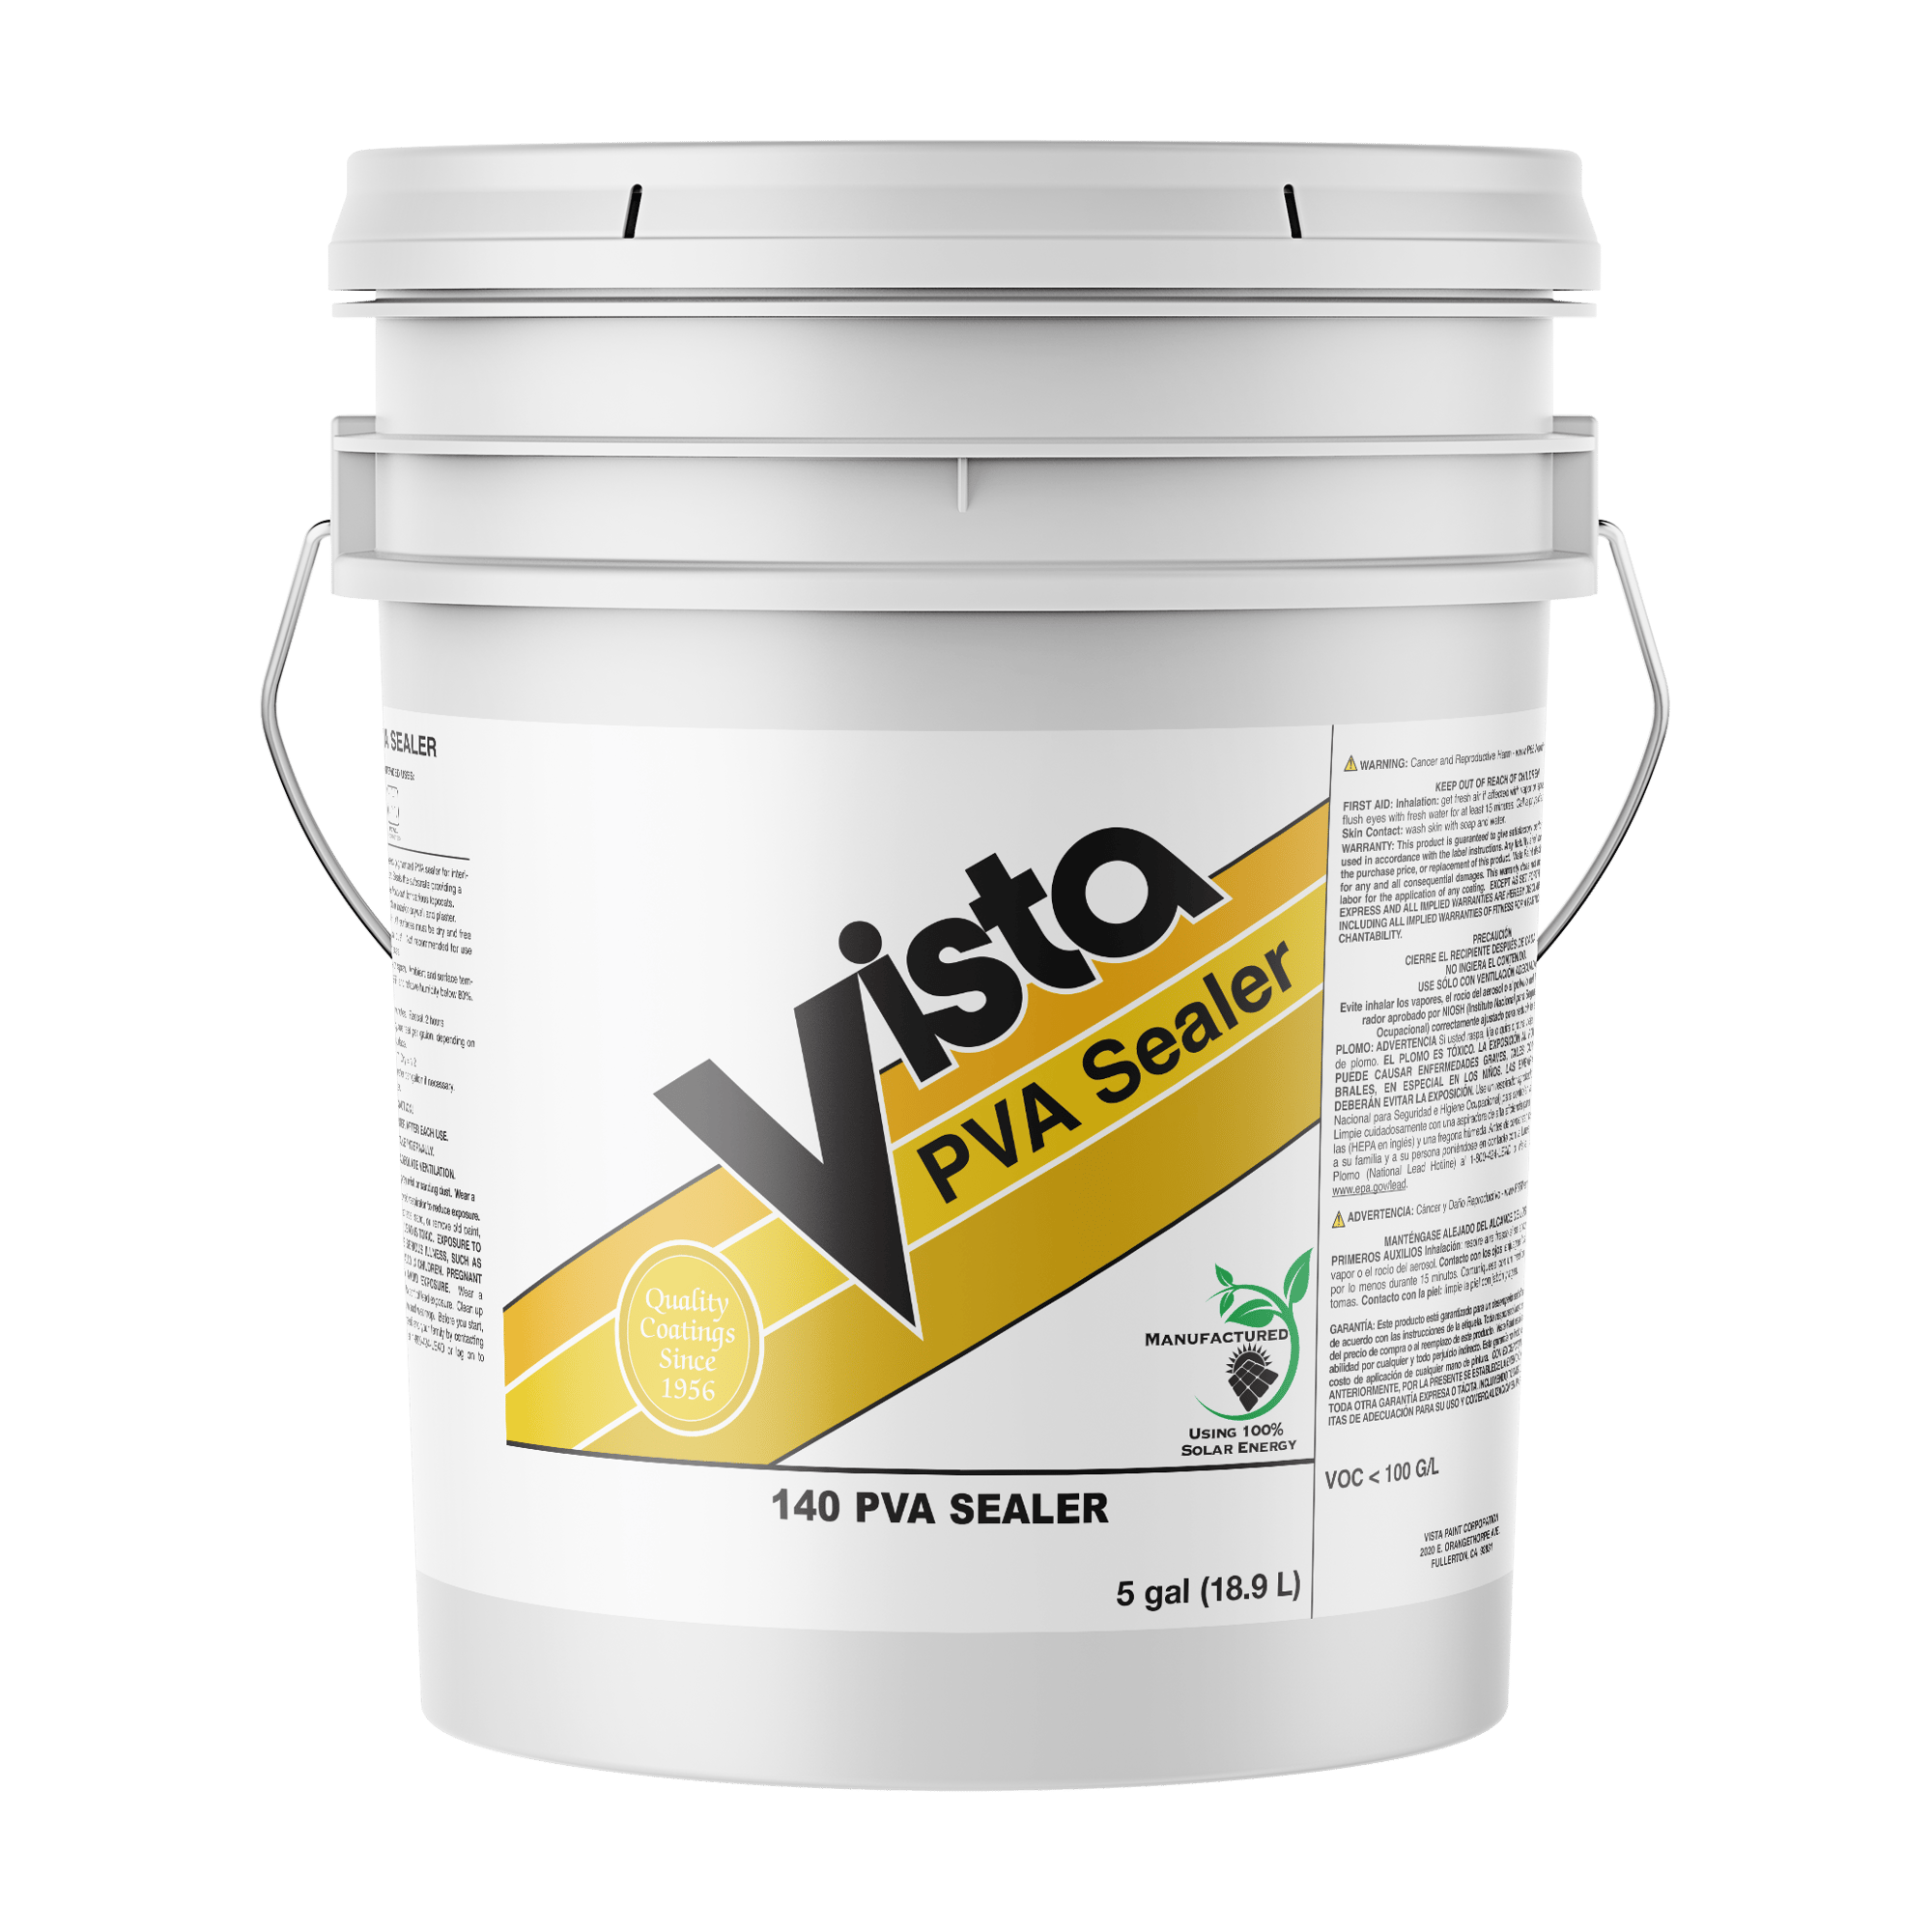 Enhance and Protect Drywall and Plaster